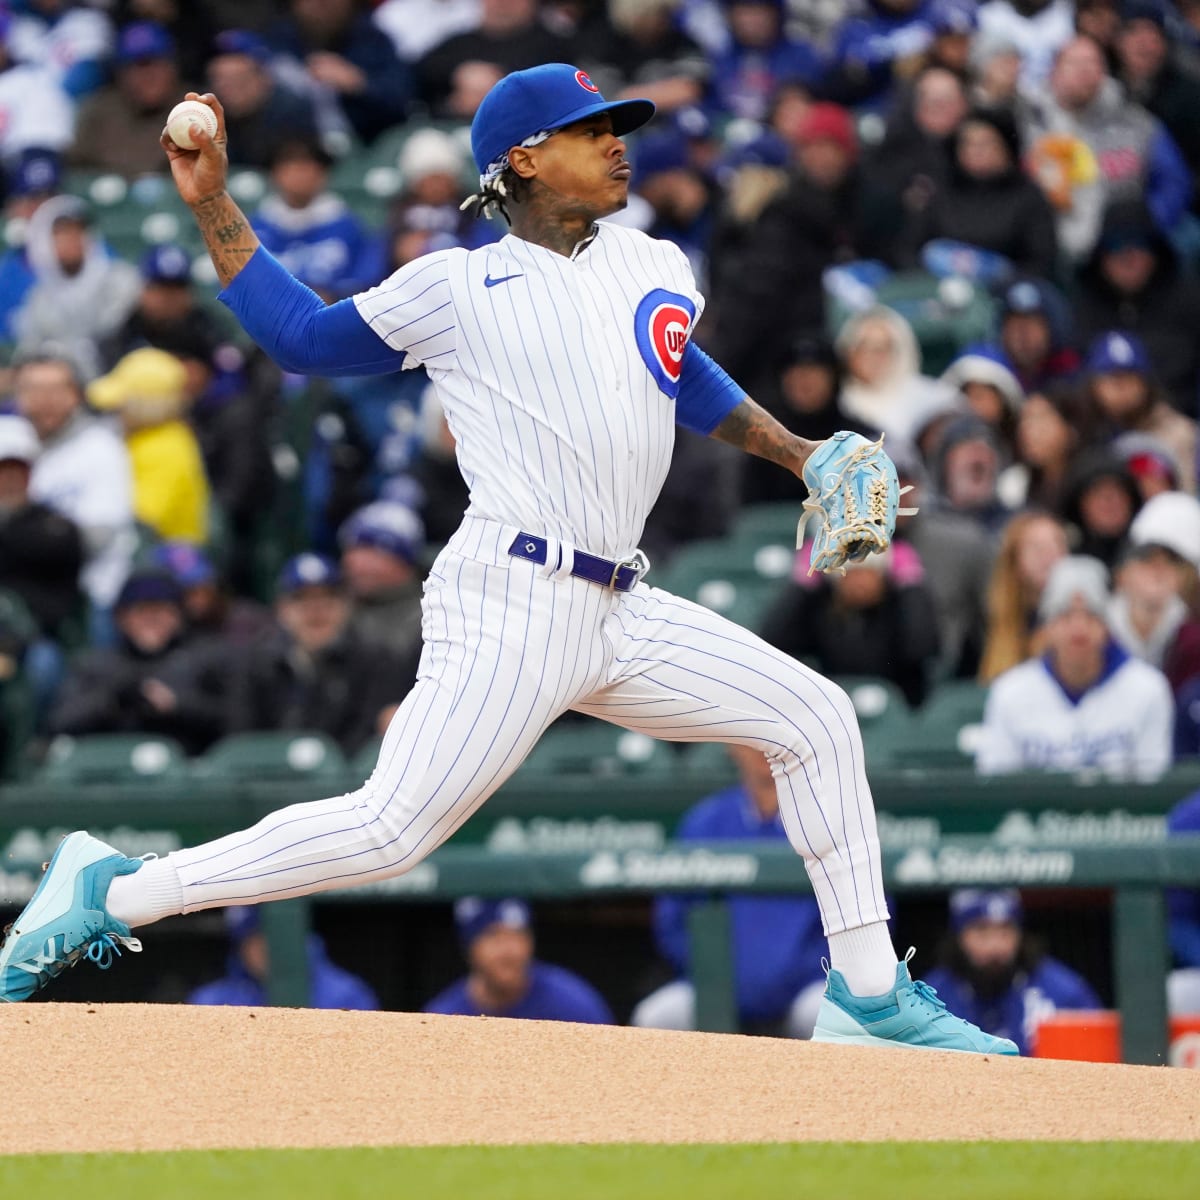 Marcus Stroman eyeing return to Chicago Cubs in bullpen role, per